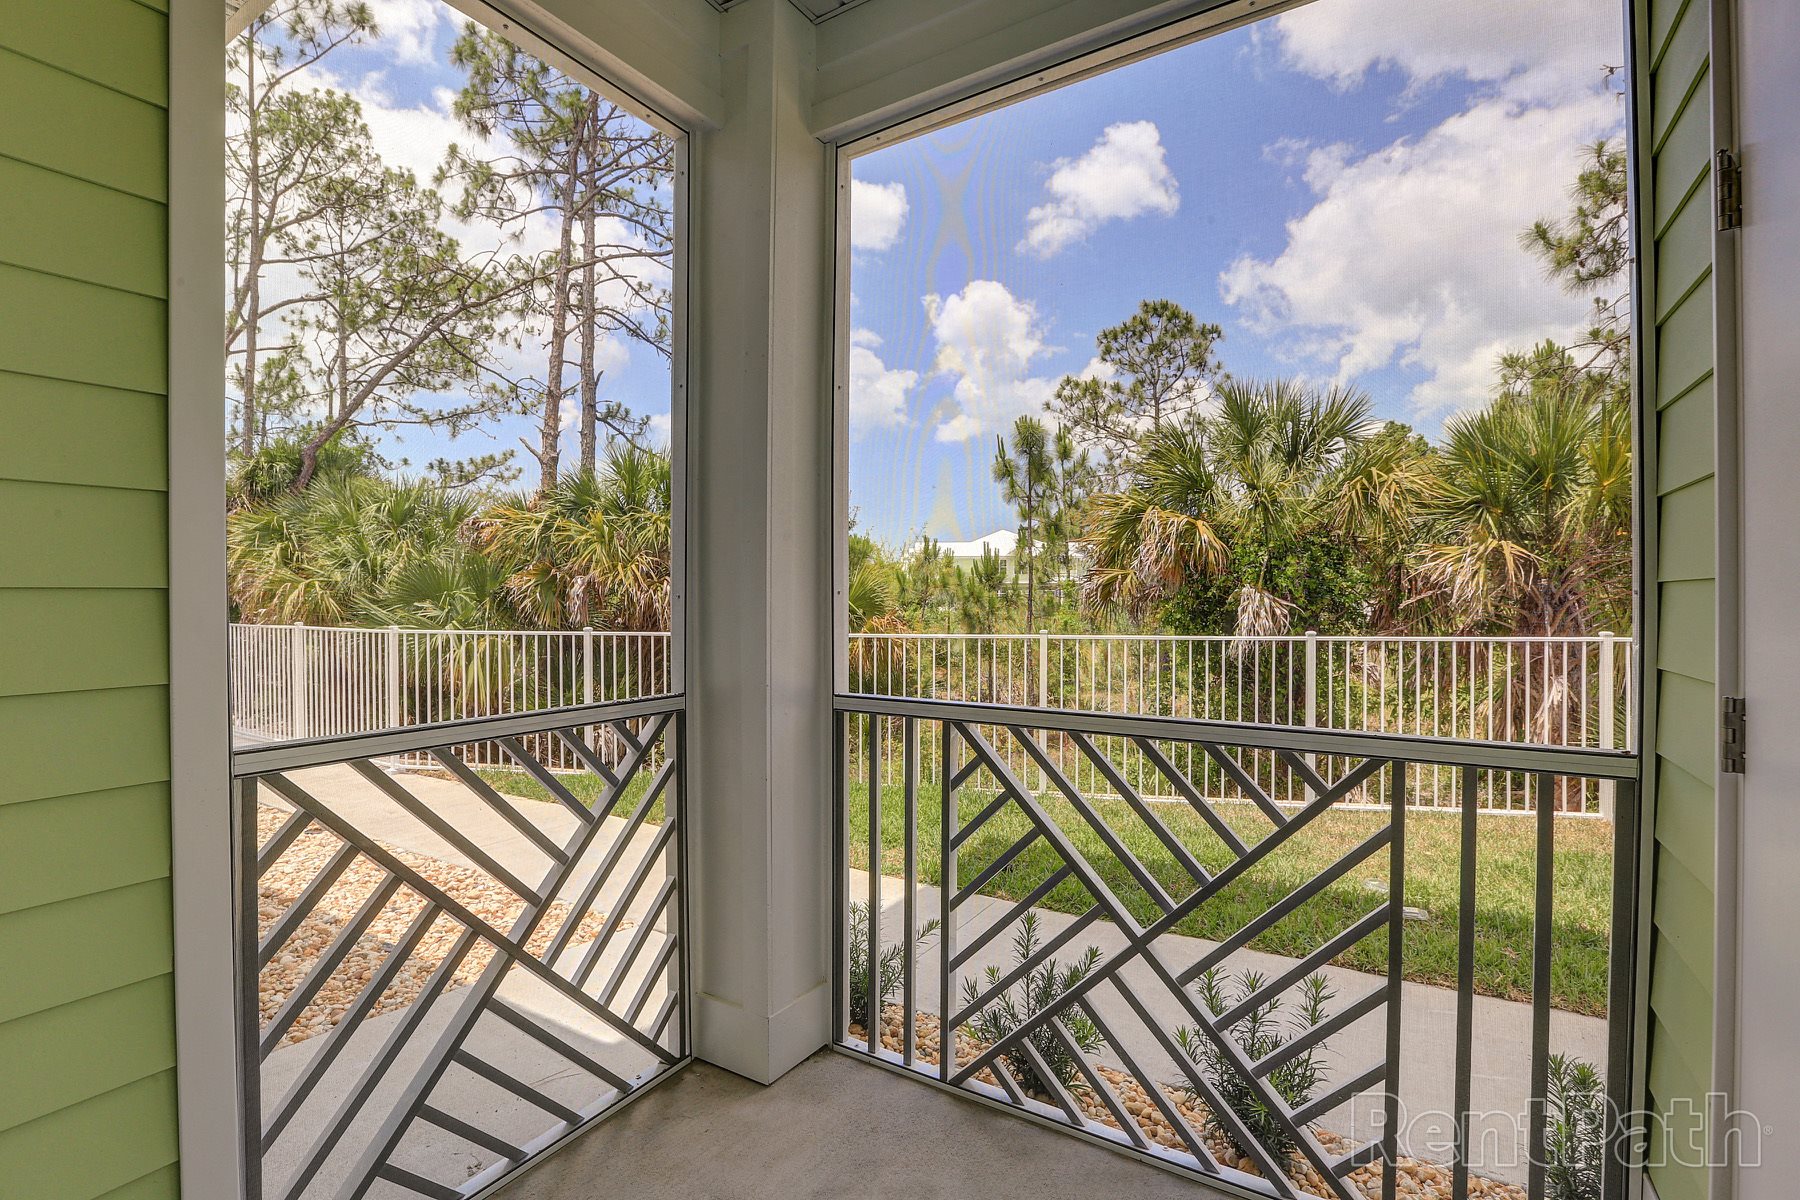 Photos and Video of Lemon Bay Apartments in Englewood, FL